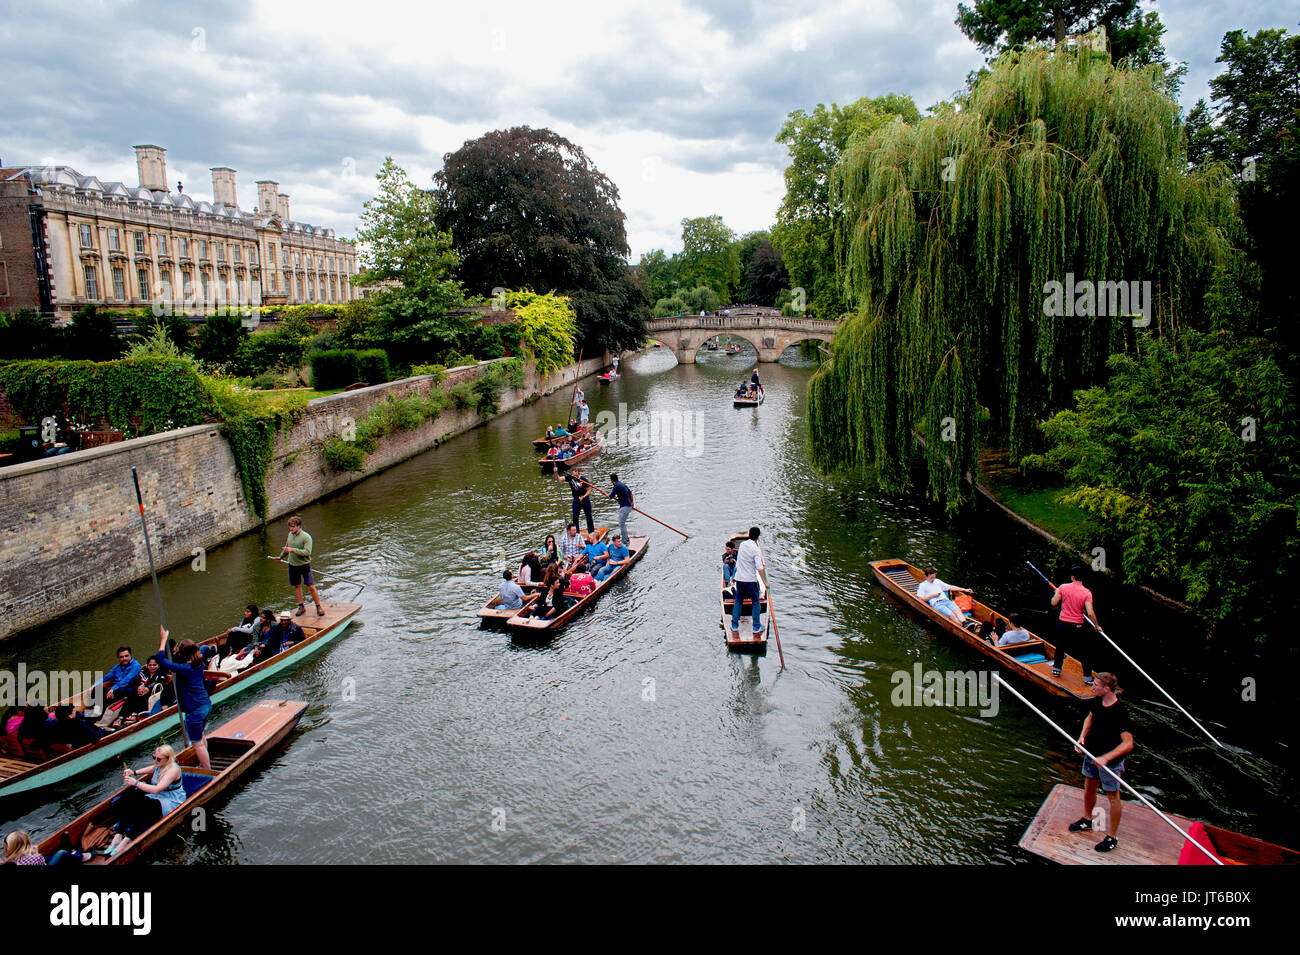 Tourists enjoying a punt along the River Cam passing under historic stone bridges and besides famous colleges of Cambridge University in England. Stock Photo